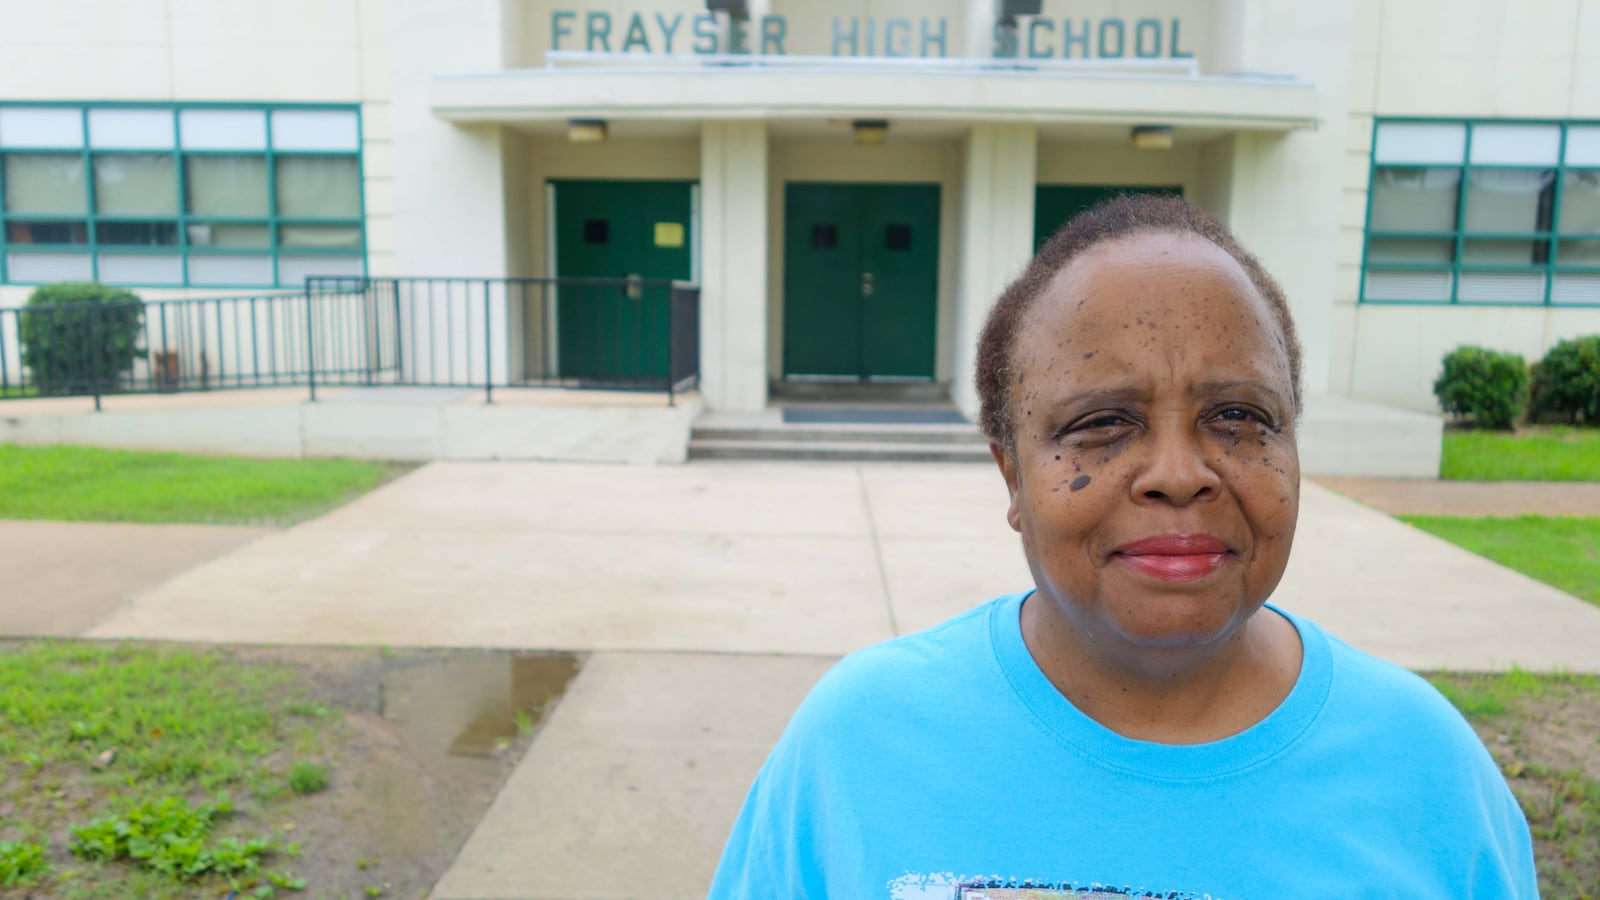 Regenia Dowell has been volunteering for the PTA at Frayser High School for nearly 20 years.